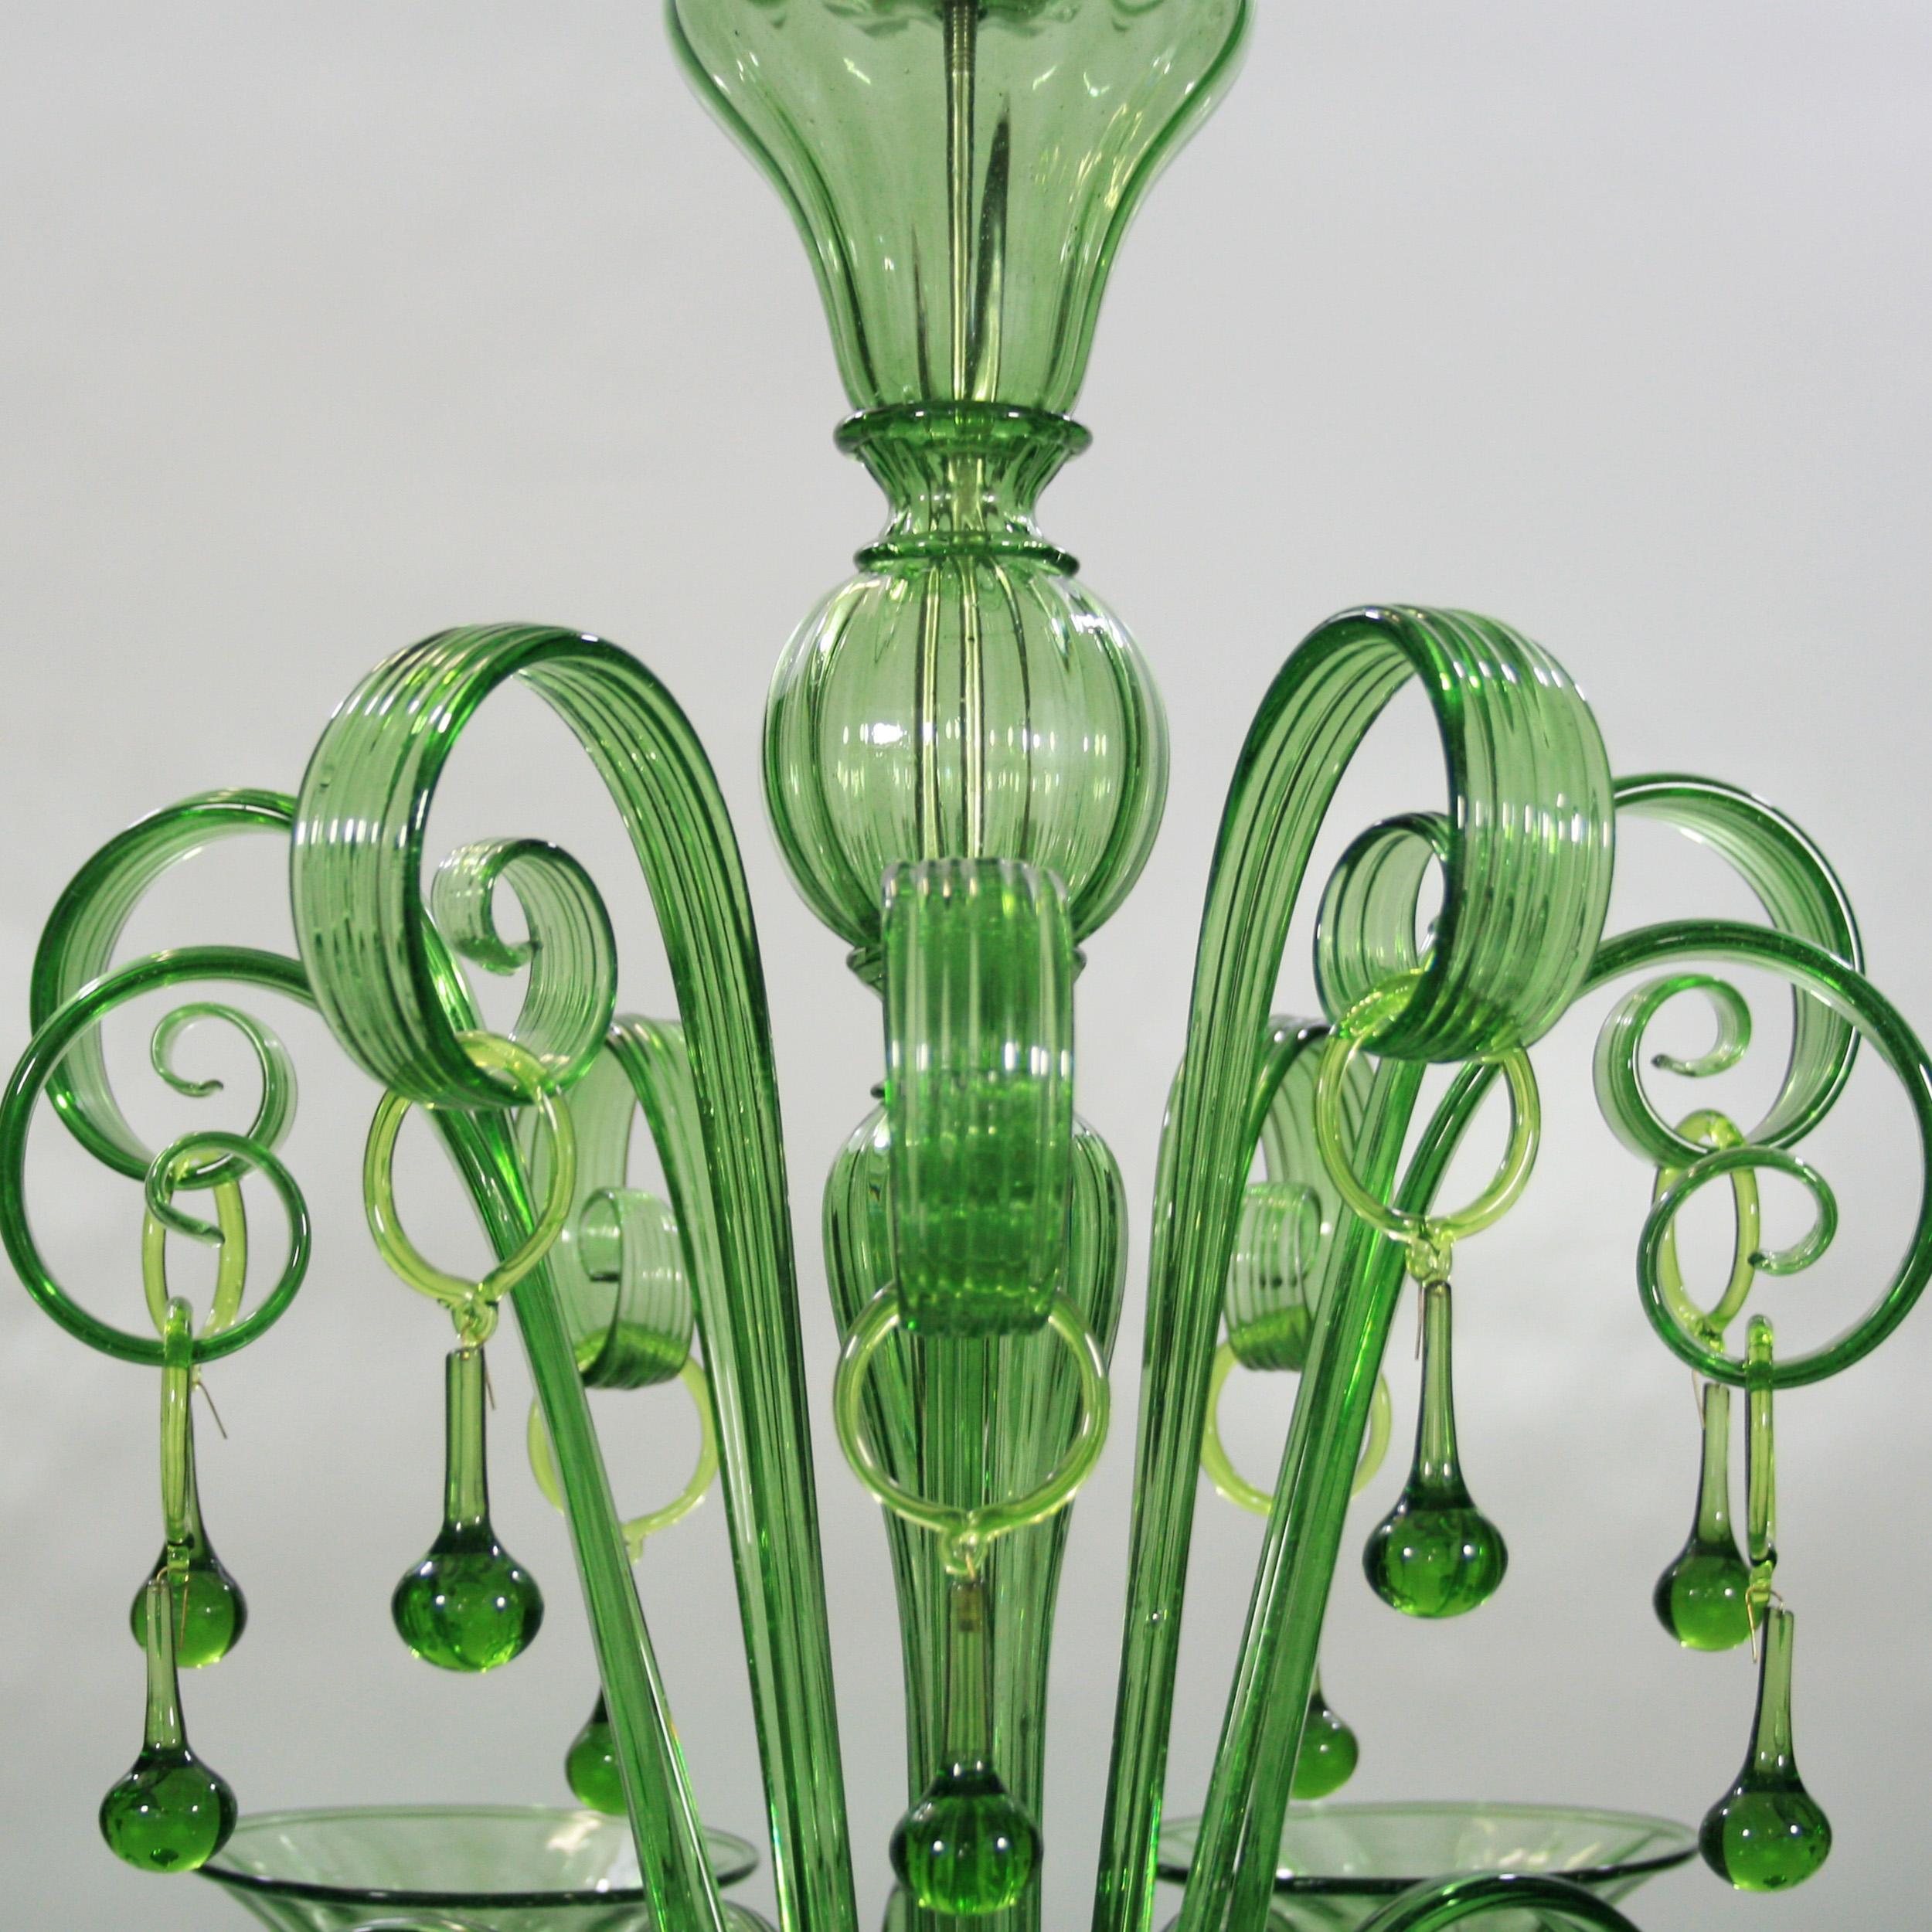 Rich chandelier by Multiforme with 6 lights, in green artistic glass, with curly ornamental elements. The lights are upwards.
Inspired by the Classic Venetian tradition it is characterized by a central column where many blown glass “pastoral”